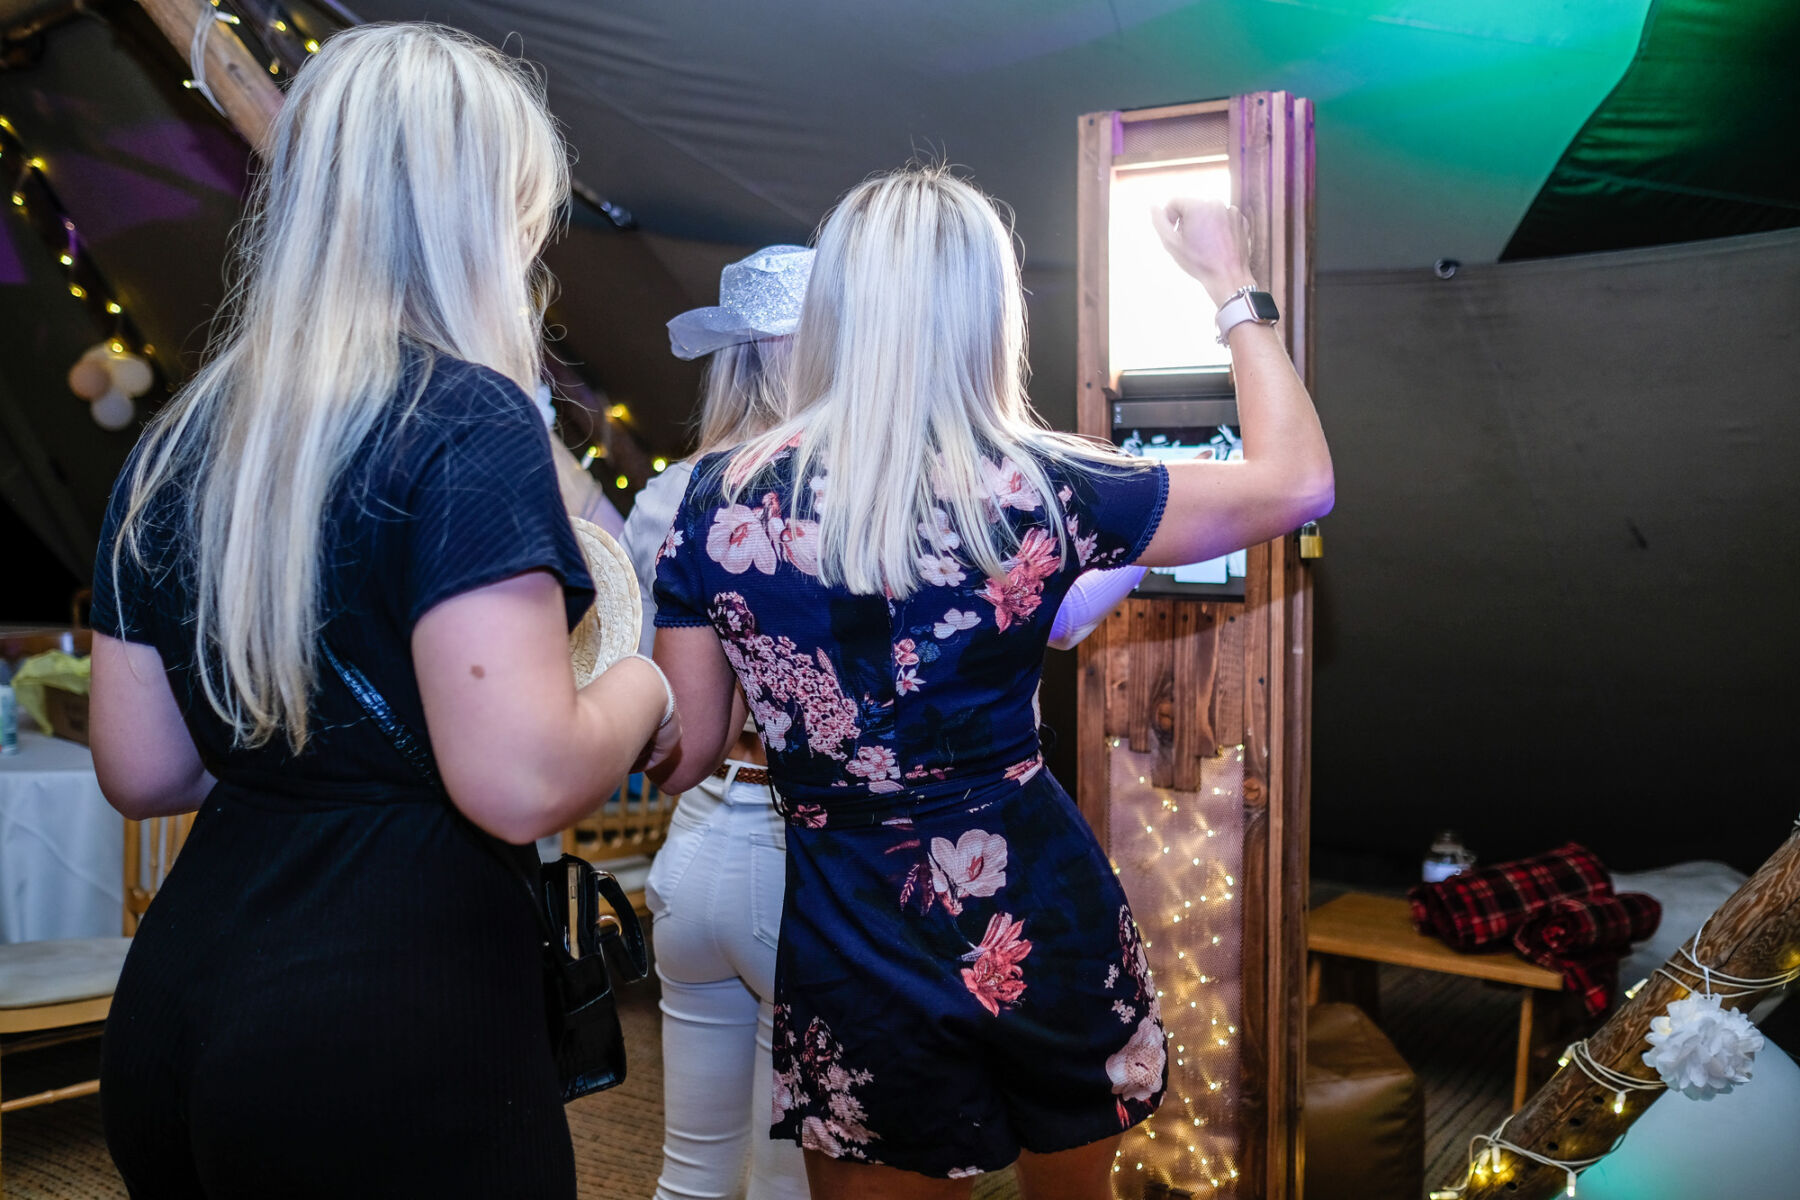 Guests taking selfies using the Fizz & Groove Selfid Pod Hire service.